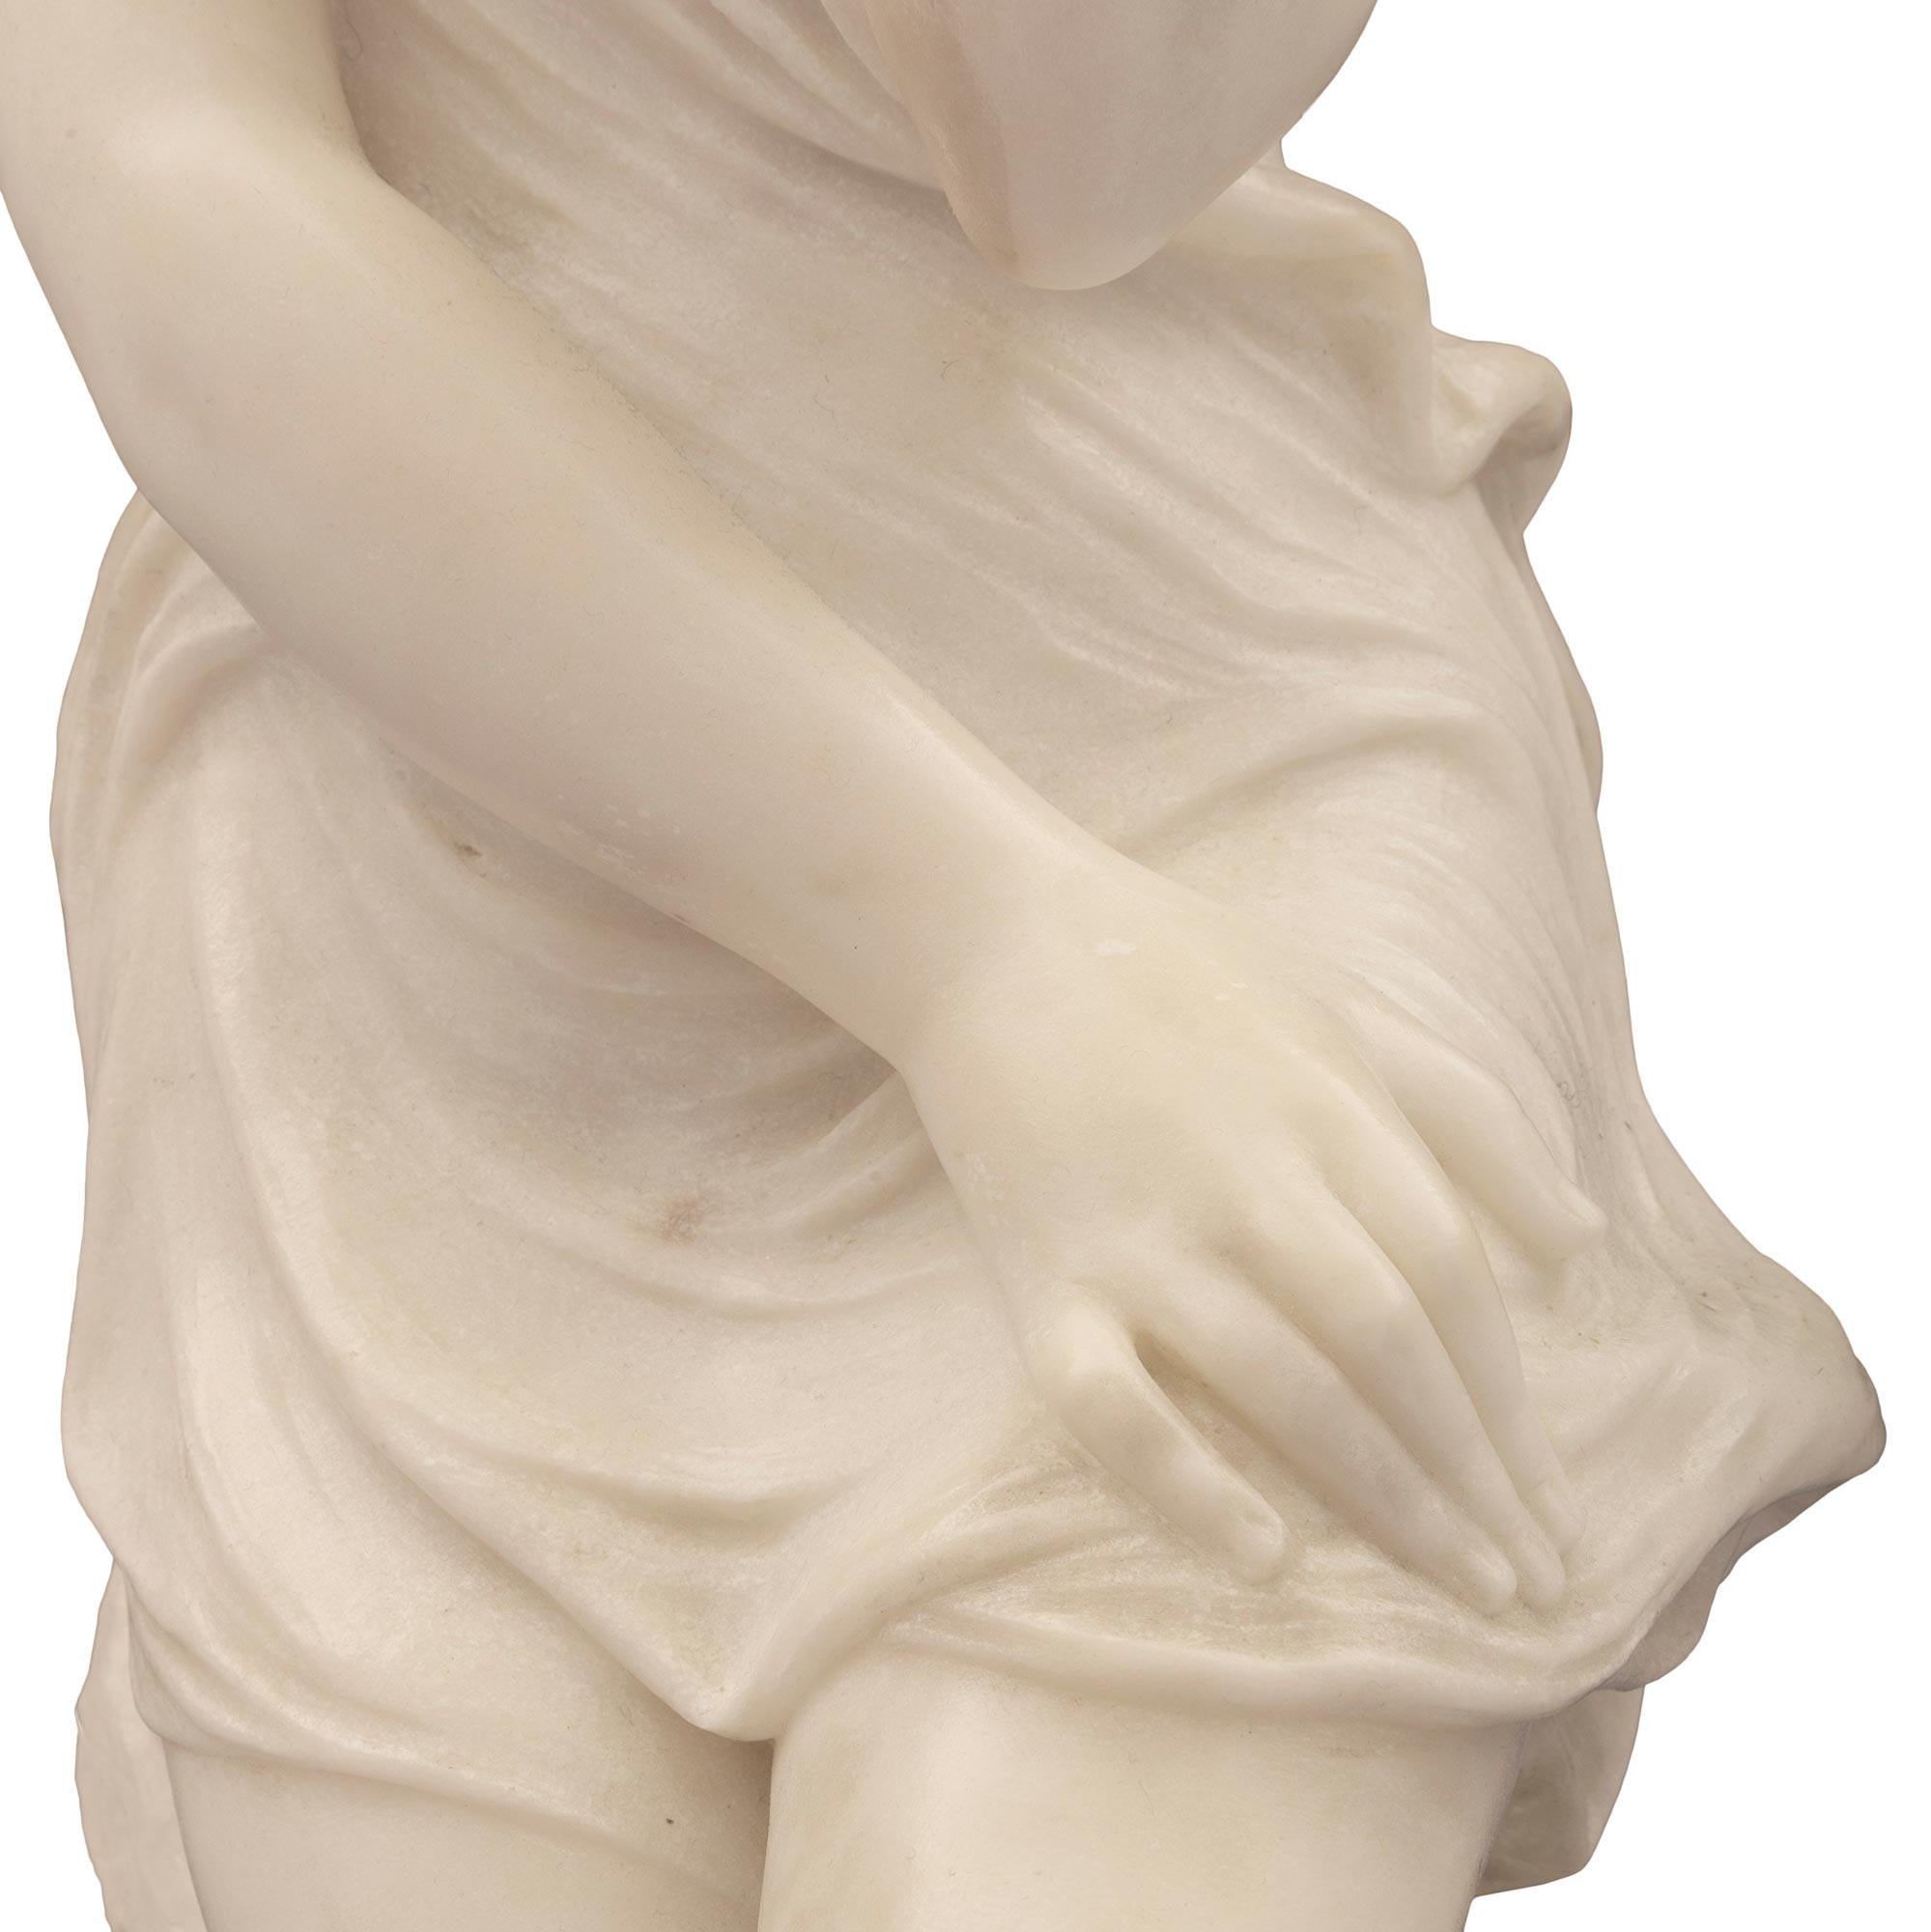 Italian 19th Century Marble Statue of Psyche on Her Original Pedestal For Sale 5